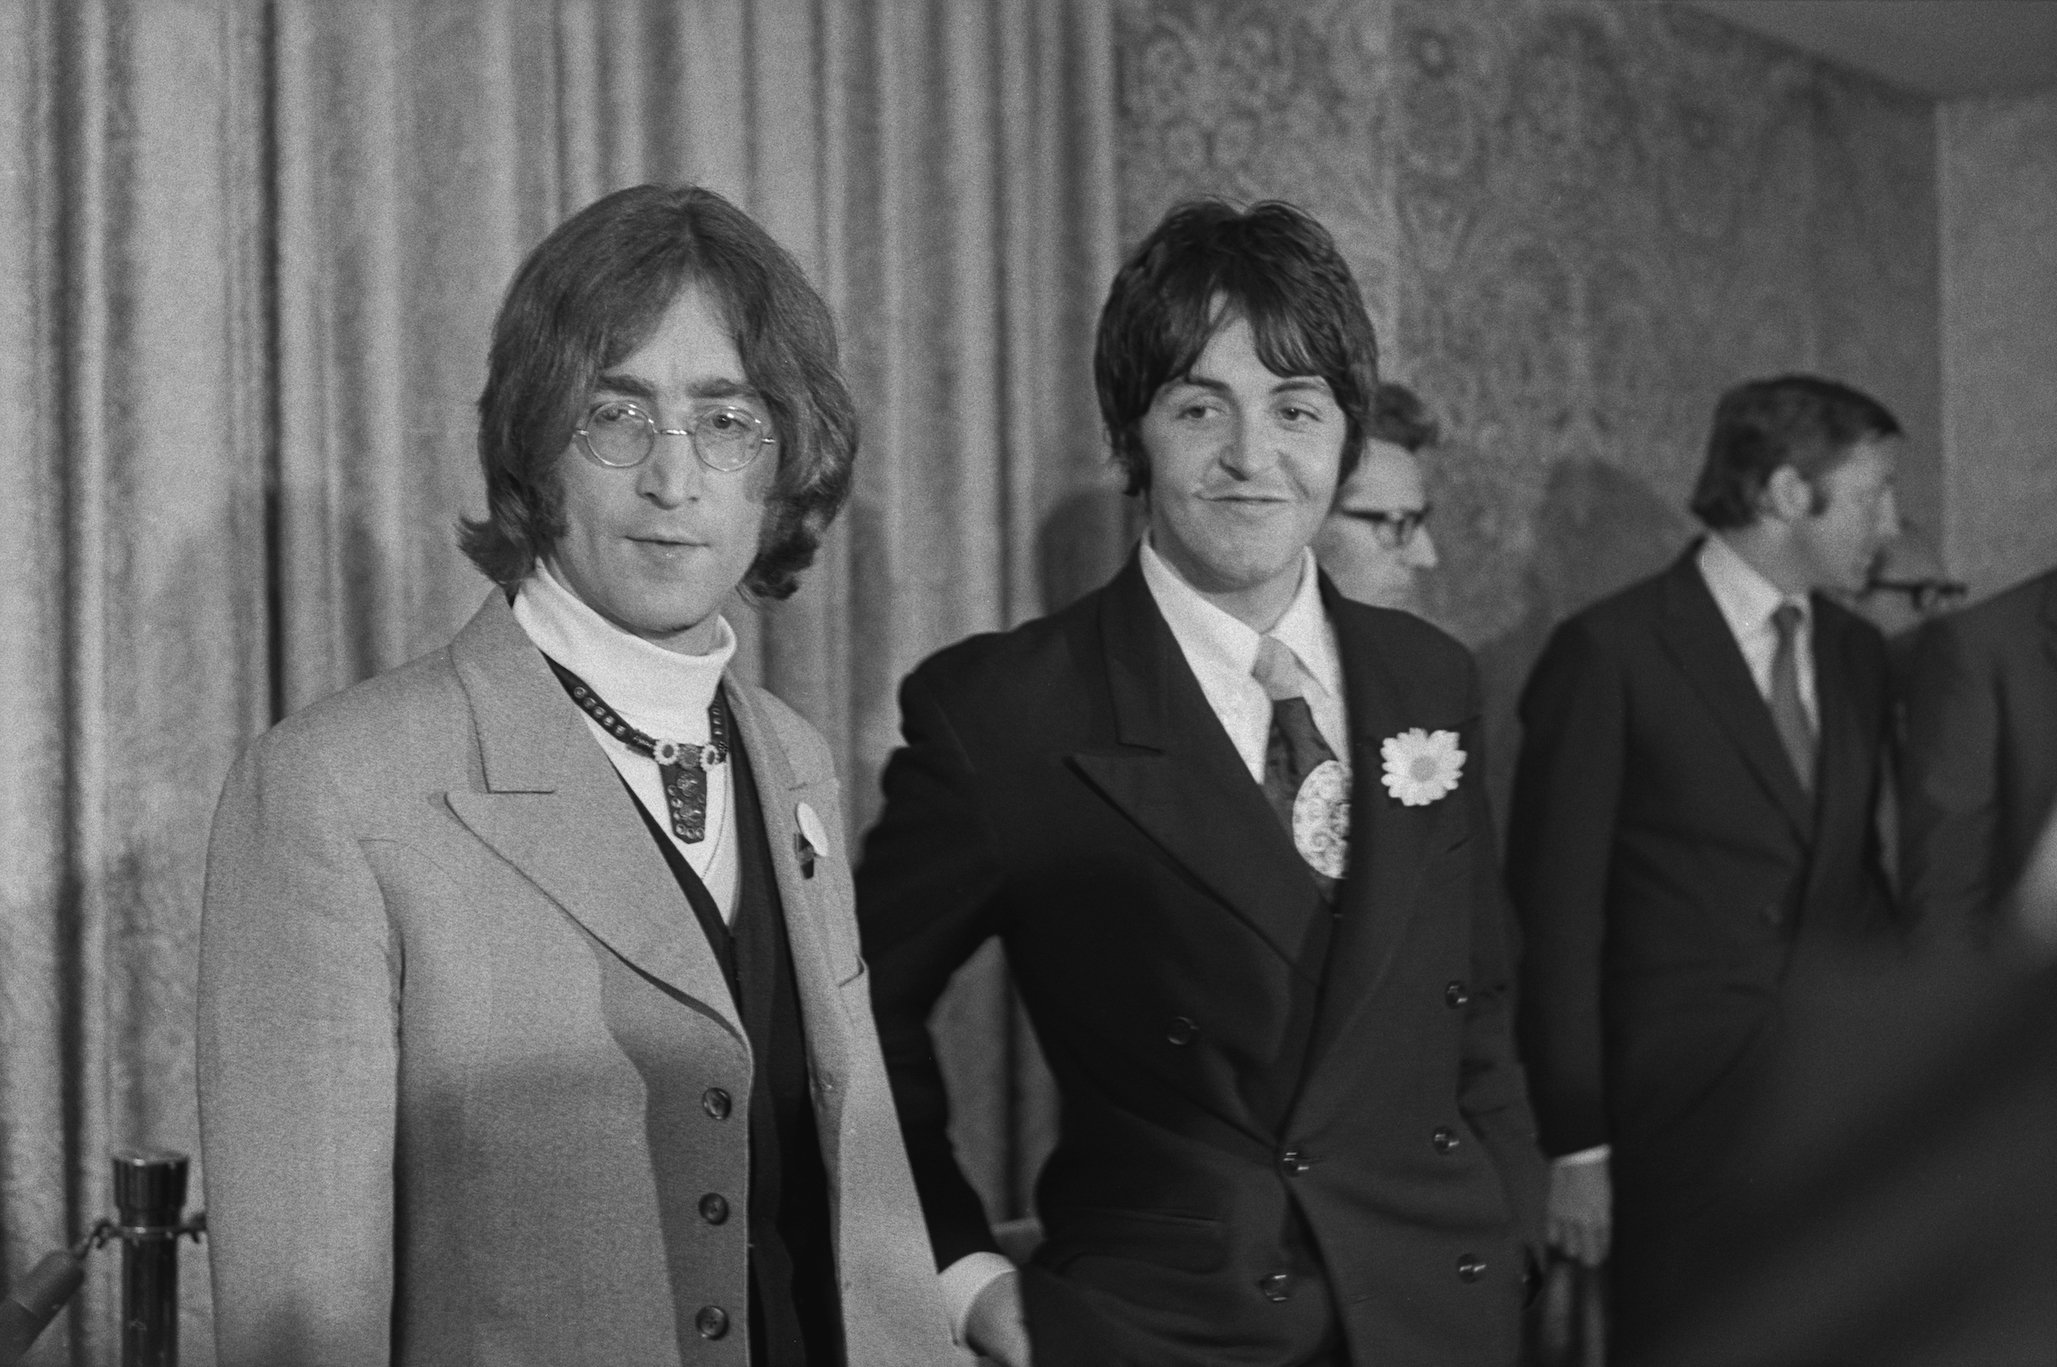 John Lennon and Paul McCartney at a press conference for Apple Corps in New York City